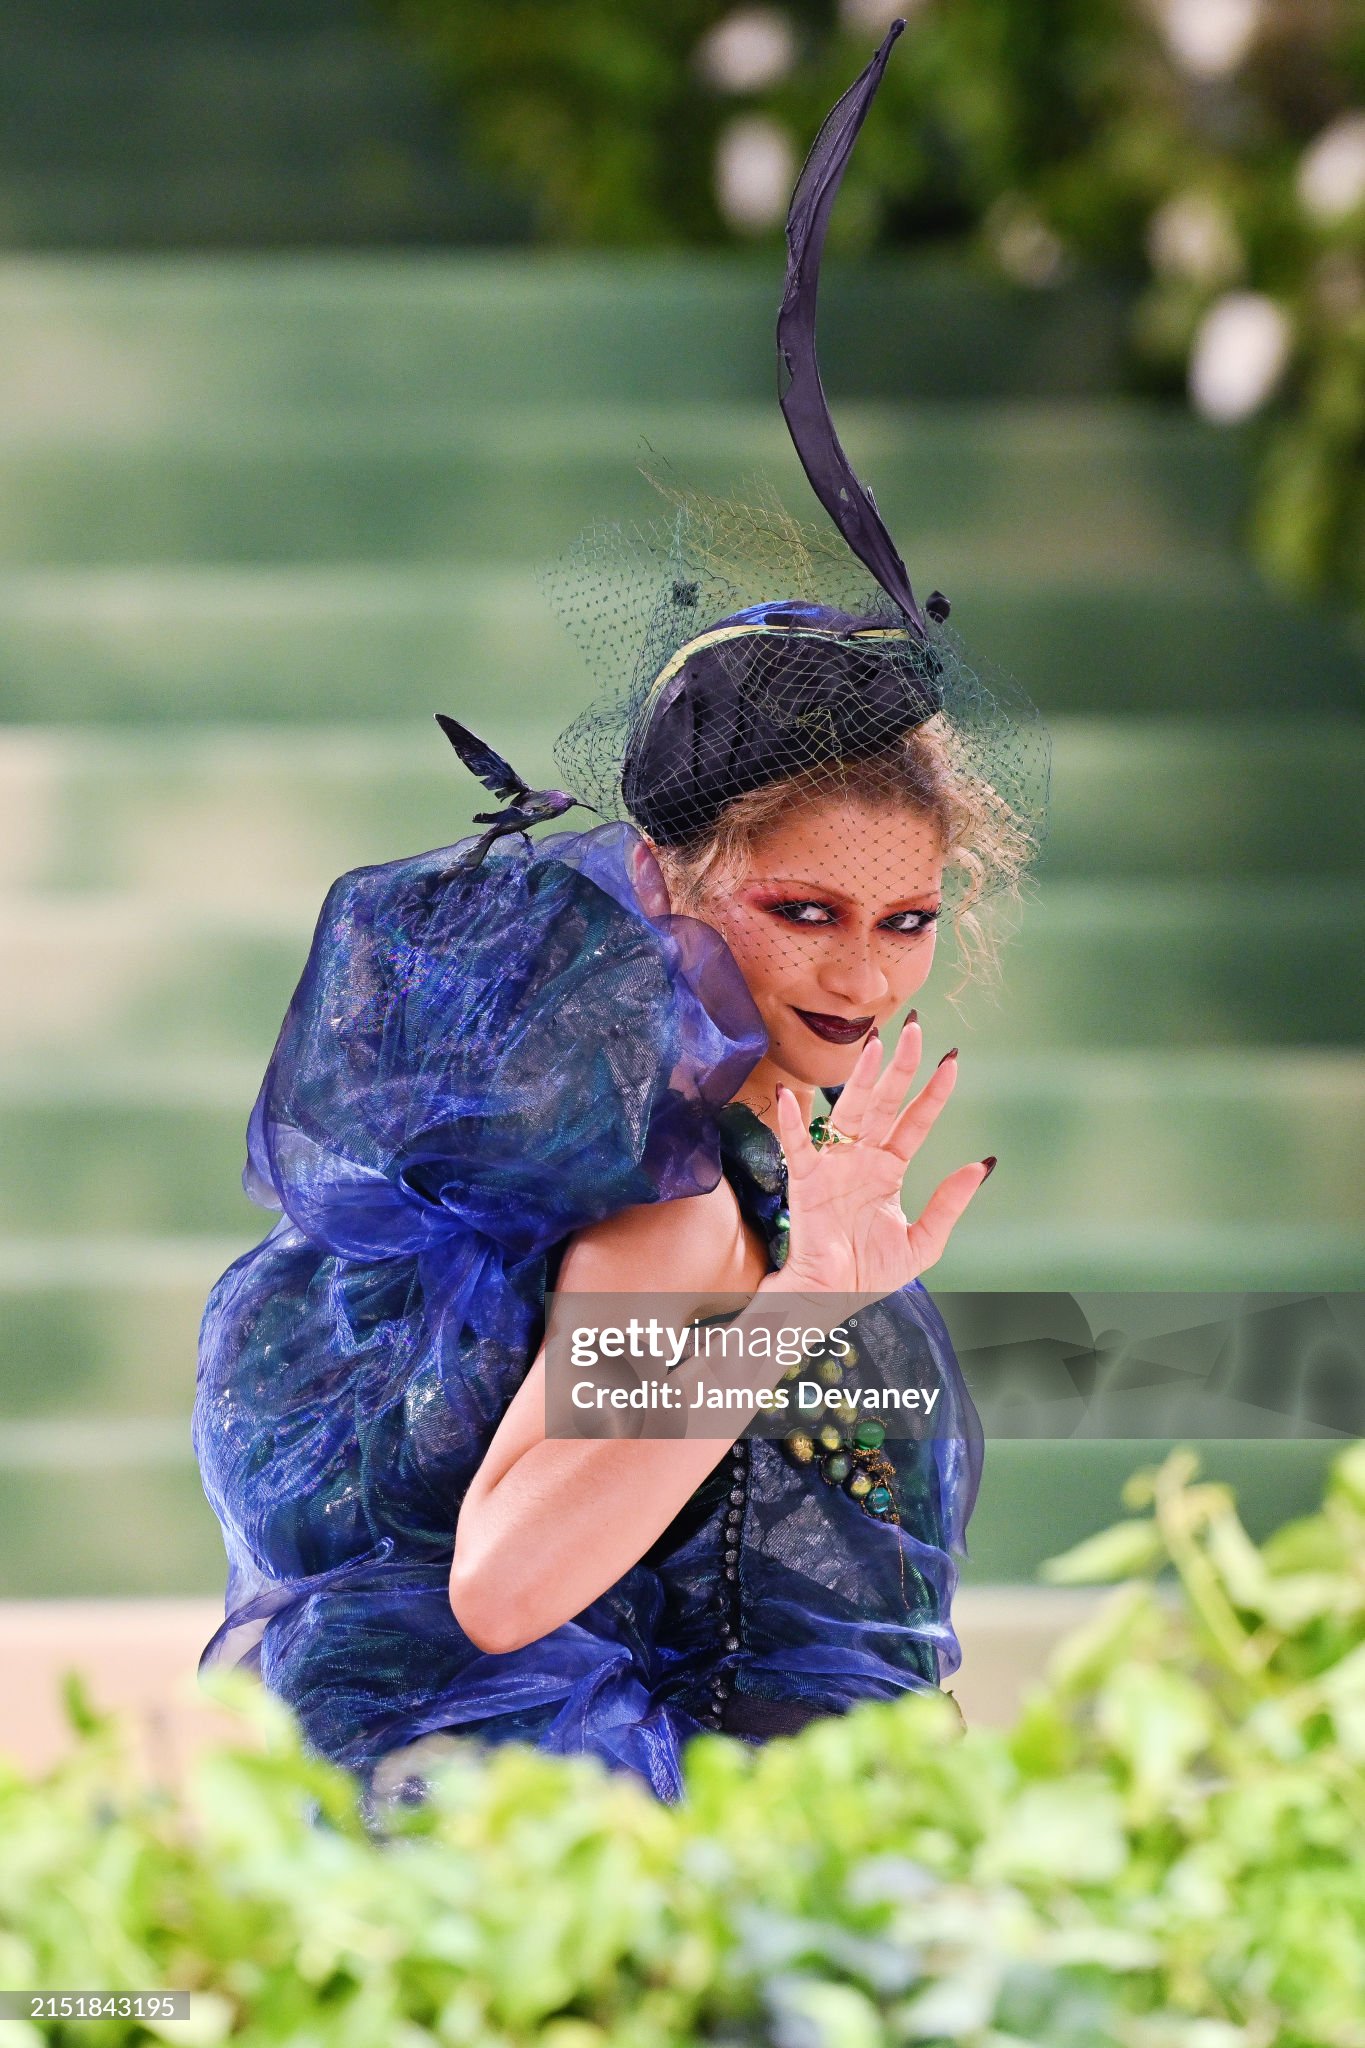 gettyimages-2151843195-2048x2048.jpg